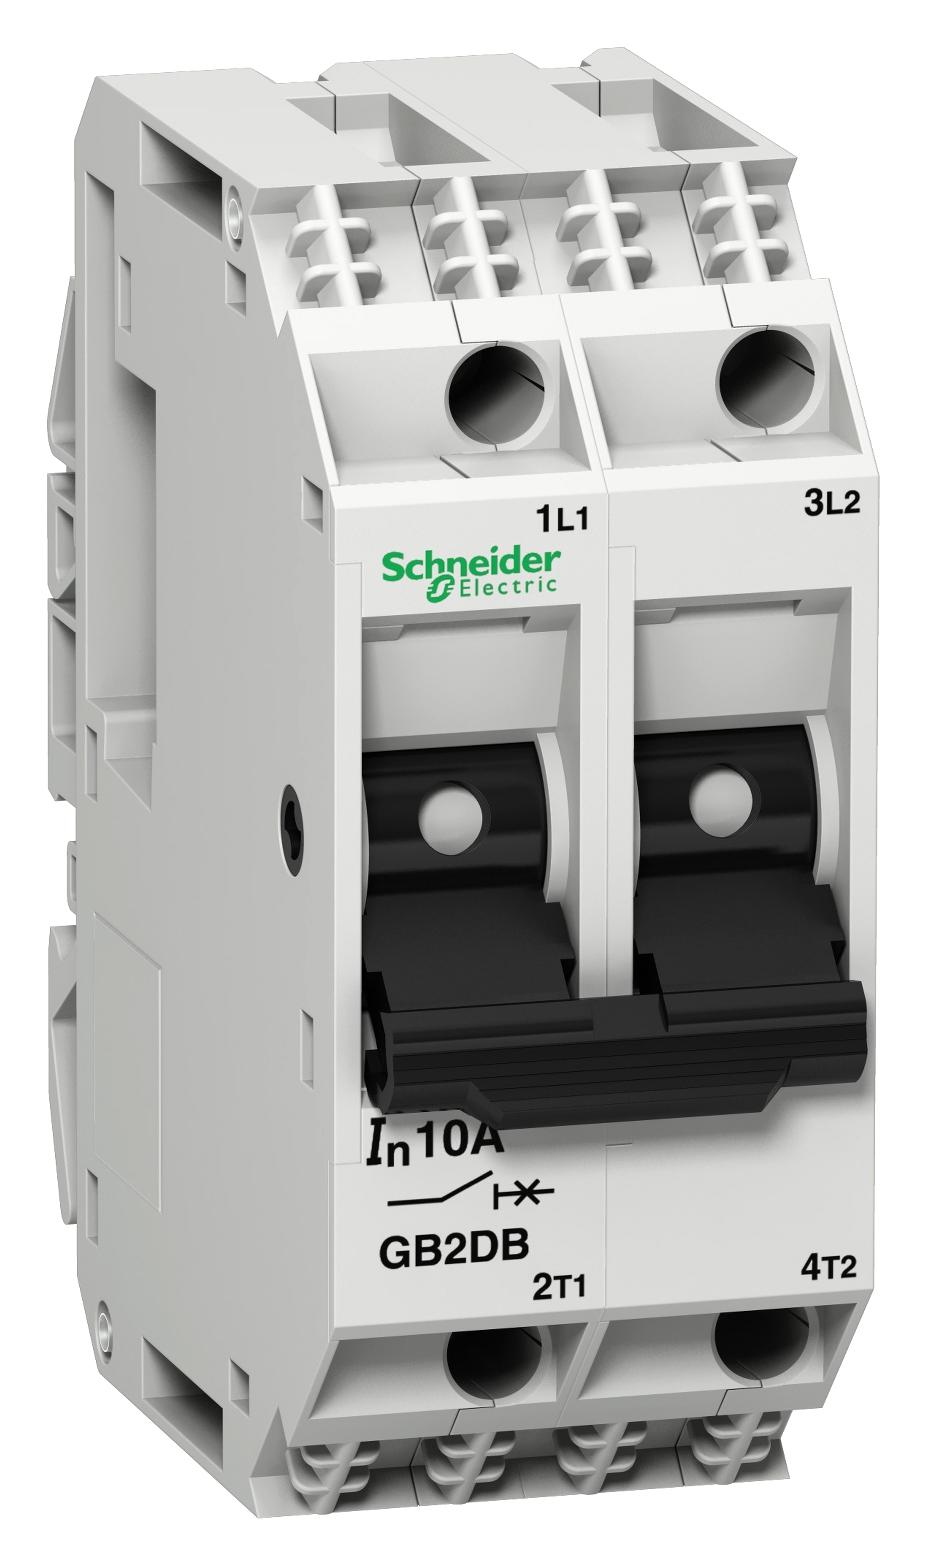 GB2DB06 THERMOMAGNETIC CKT BREAKER, 2P, 1A SCHNEIDER ELECTRIC